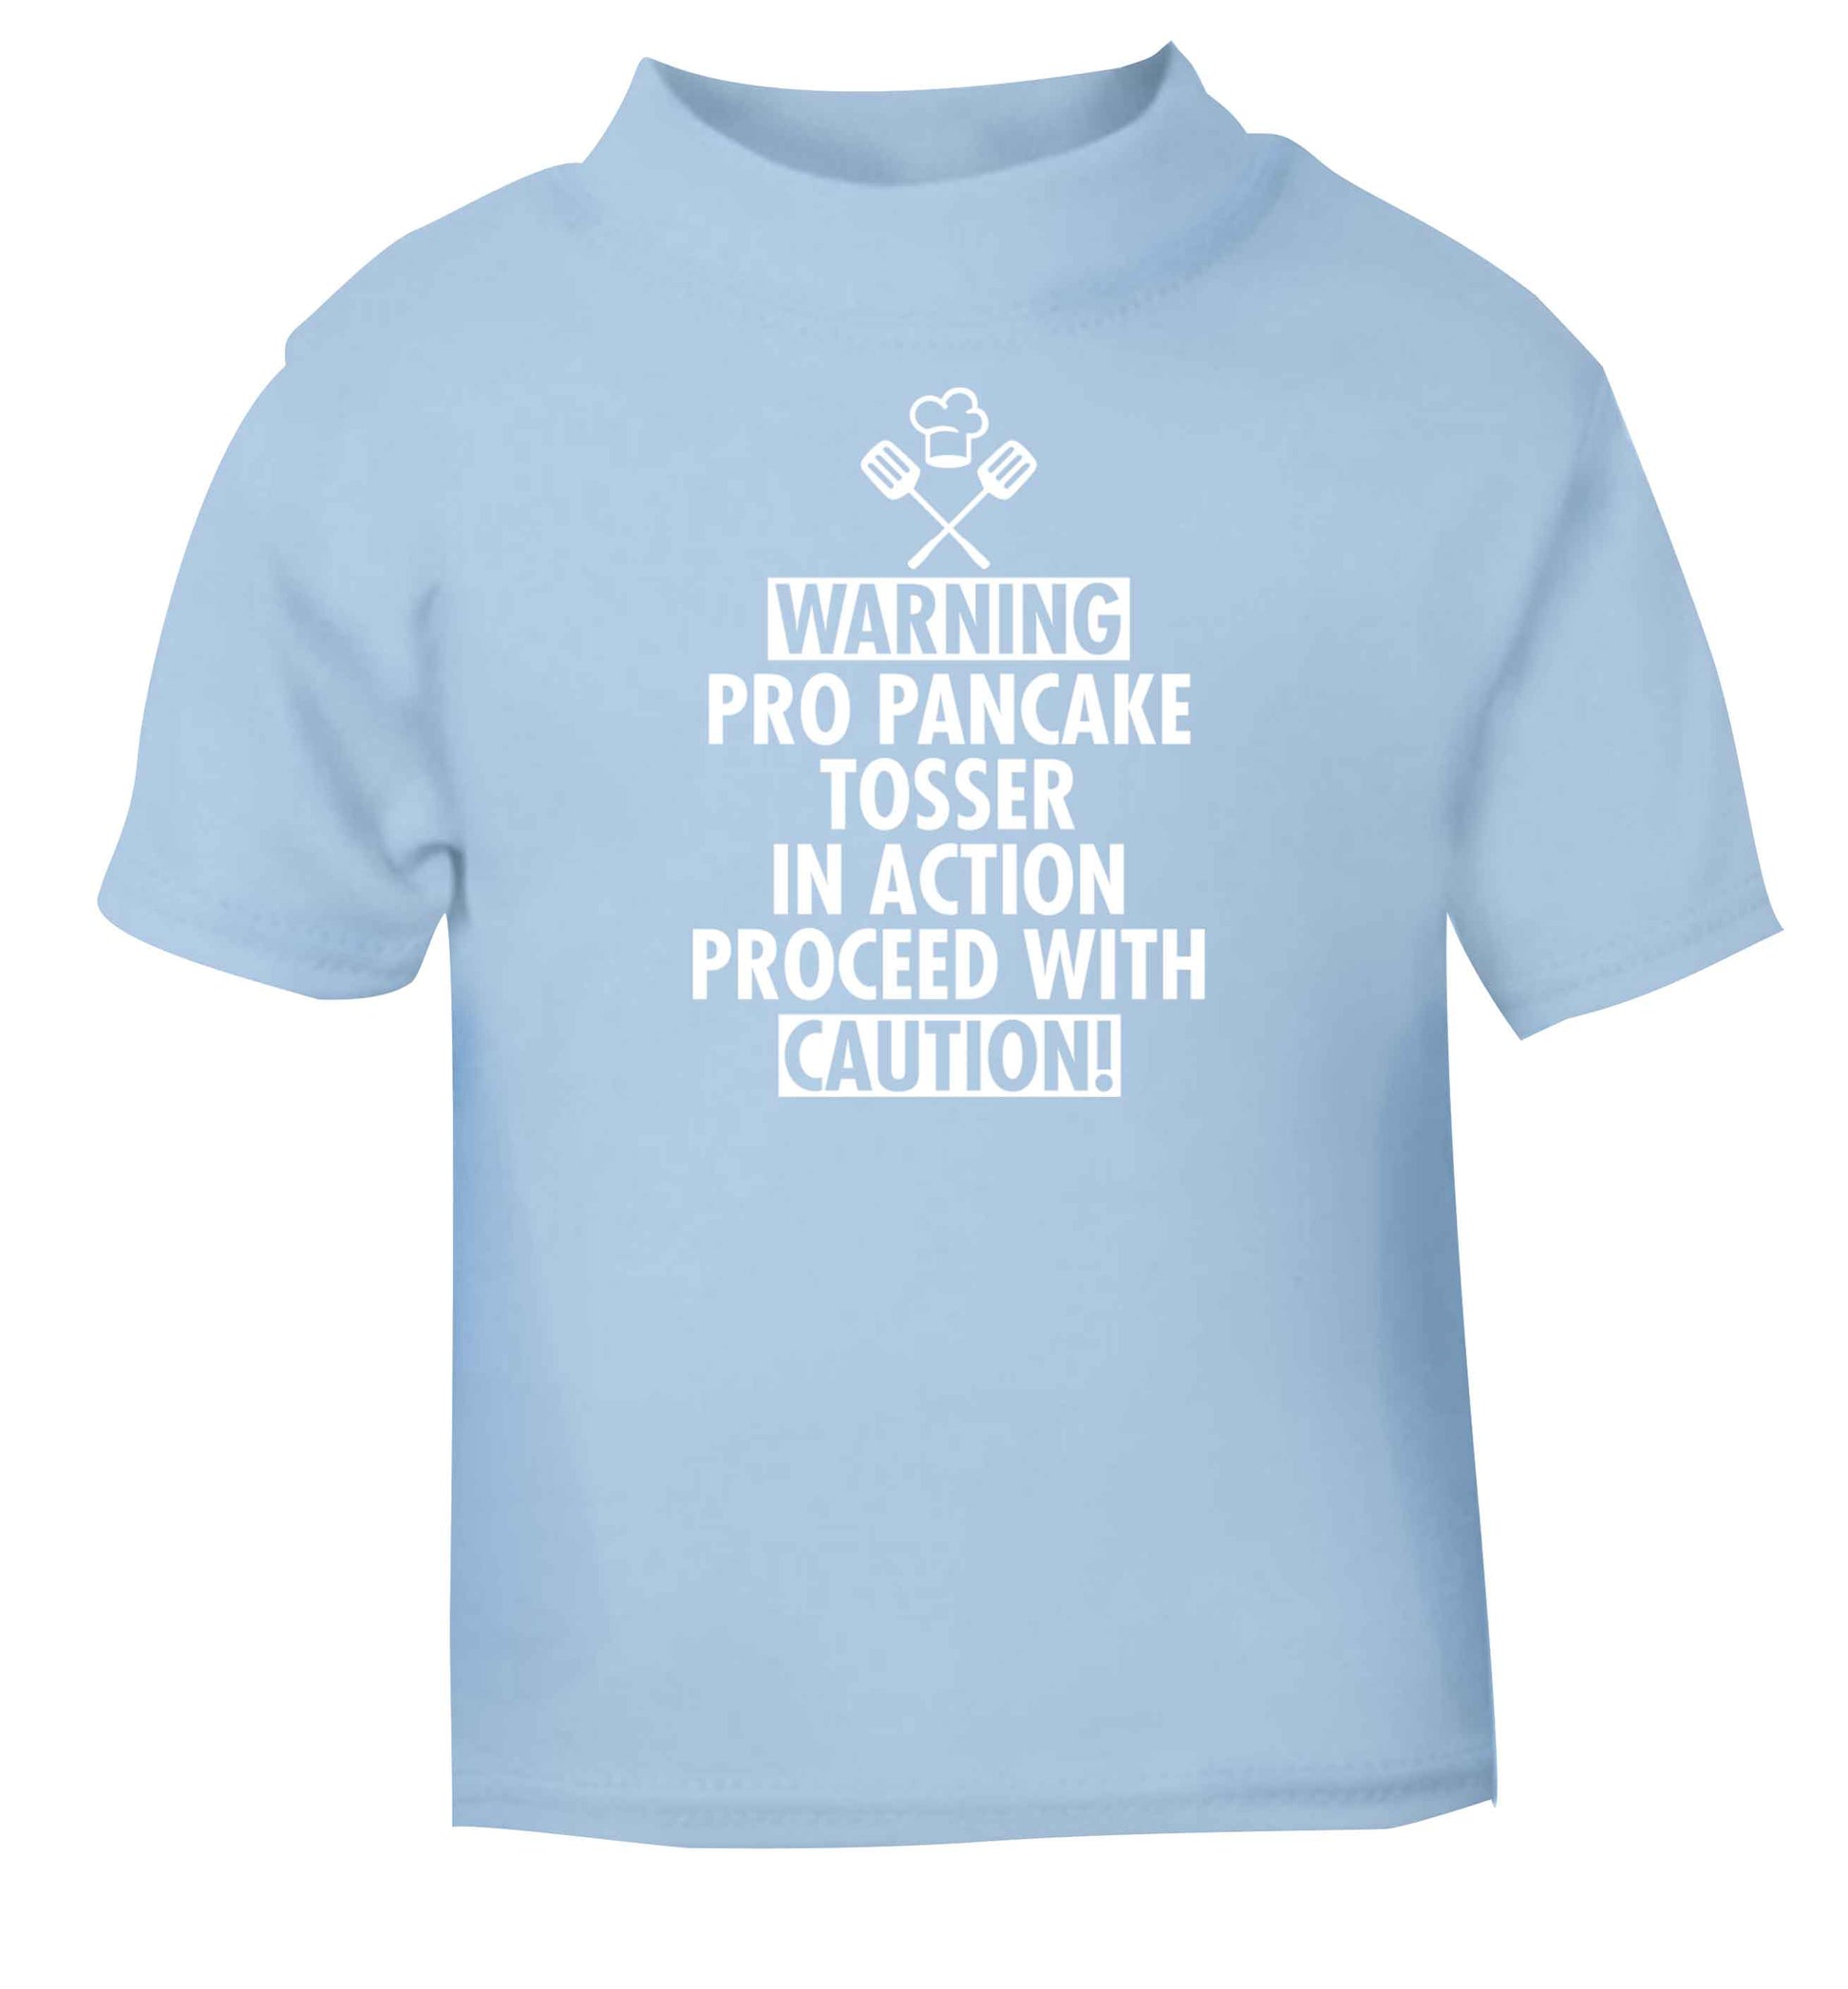 Warning pro pancake tosser in action proceed with caution light blue baby toddler Tshirt 2 Years